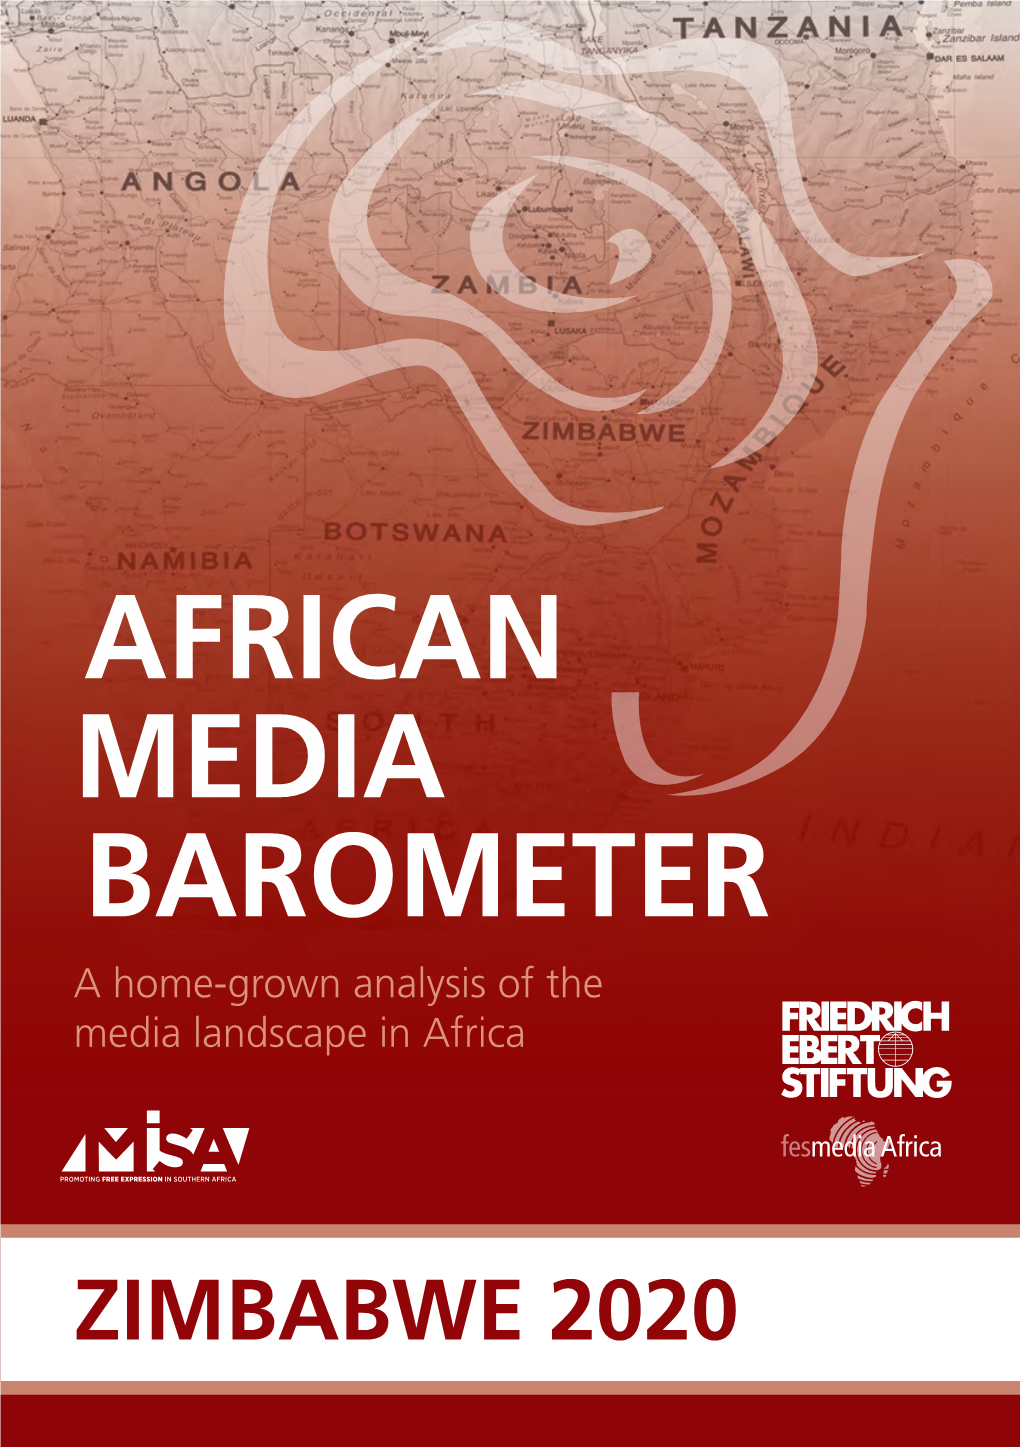 AFRICAN MEDIA BAROMETER a Home-Grown Analysis of the Media Landscape in Africa